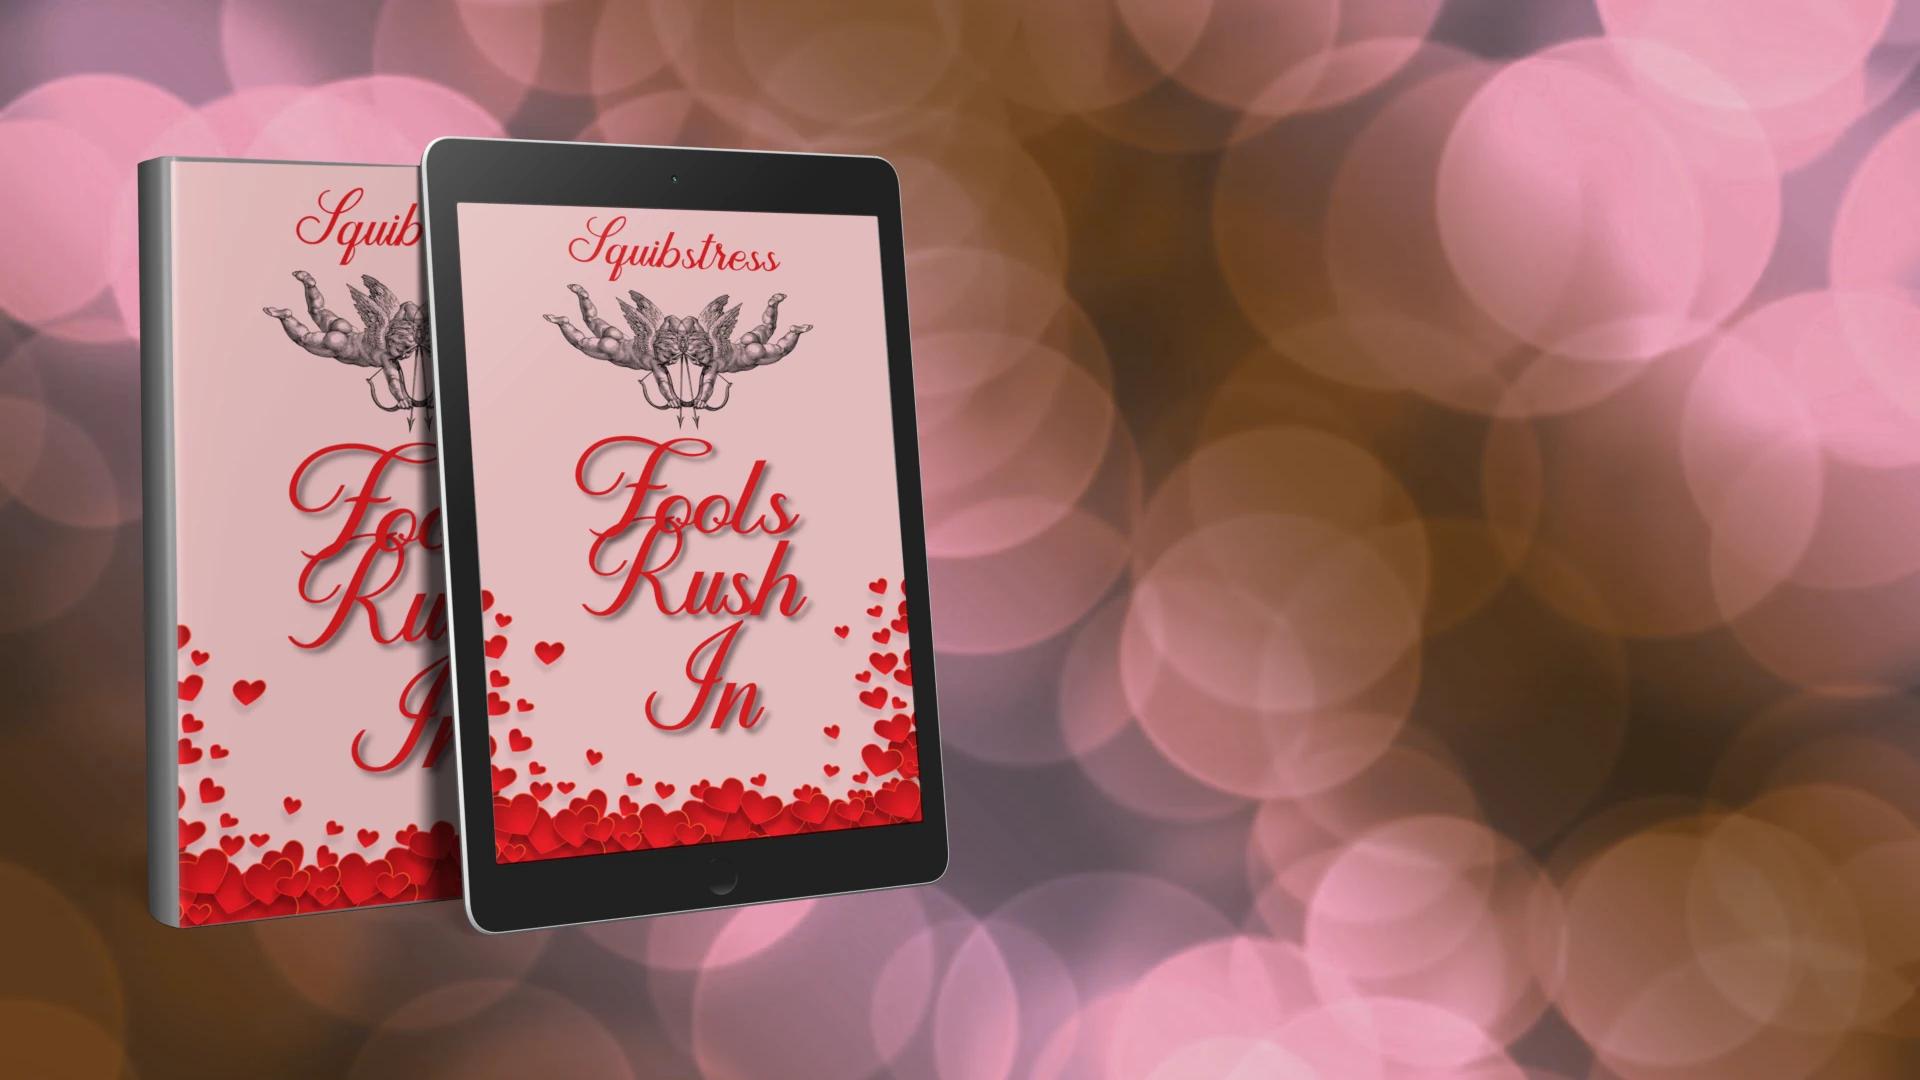 Pink bokeh background with iPad featuring book cover with pink background and hearts at the bottom. Two cherubs point bows and arrows at the title, Fools Rush In by Squibstress